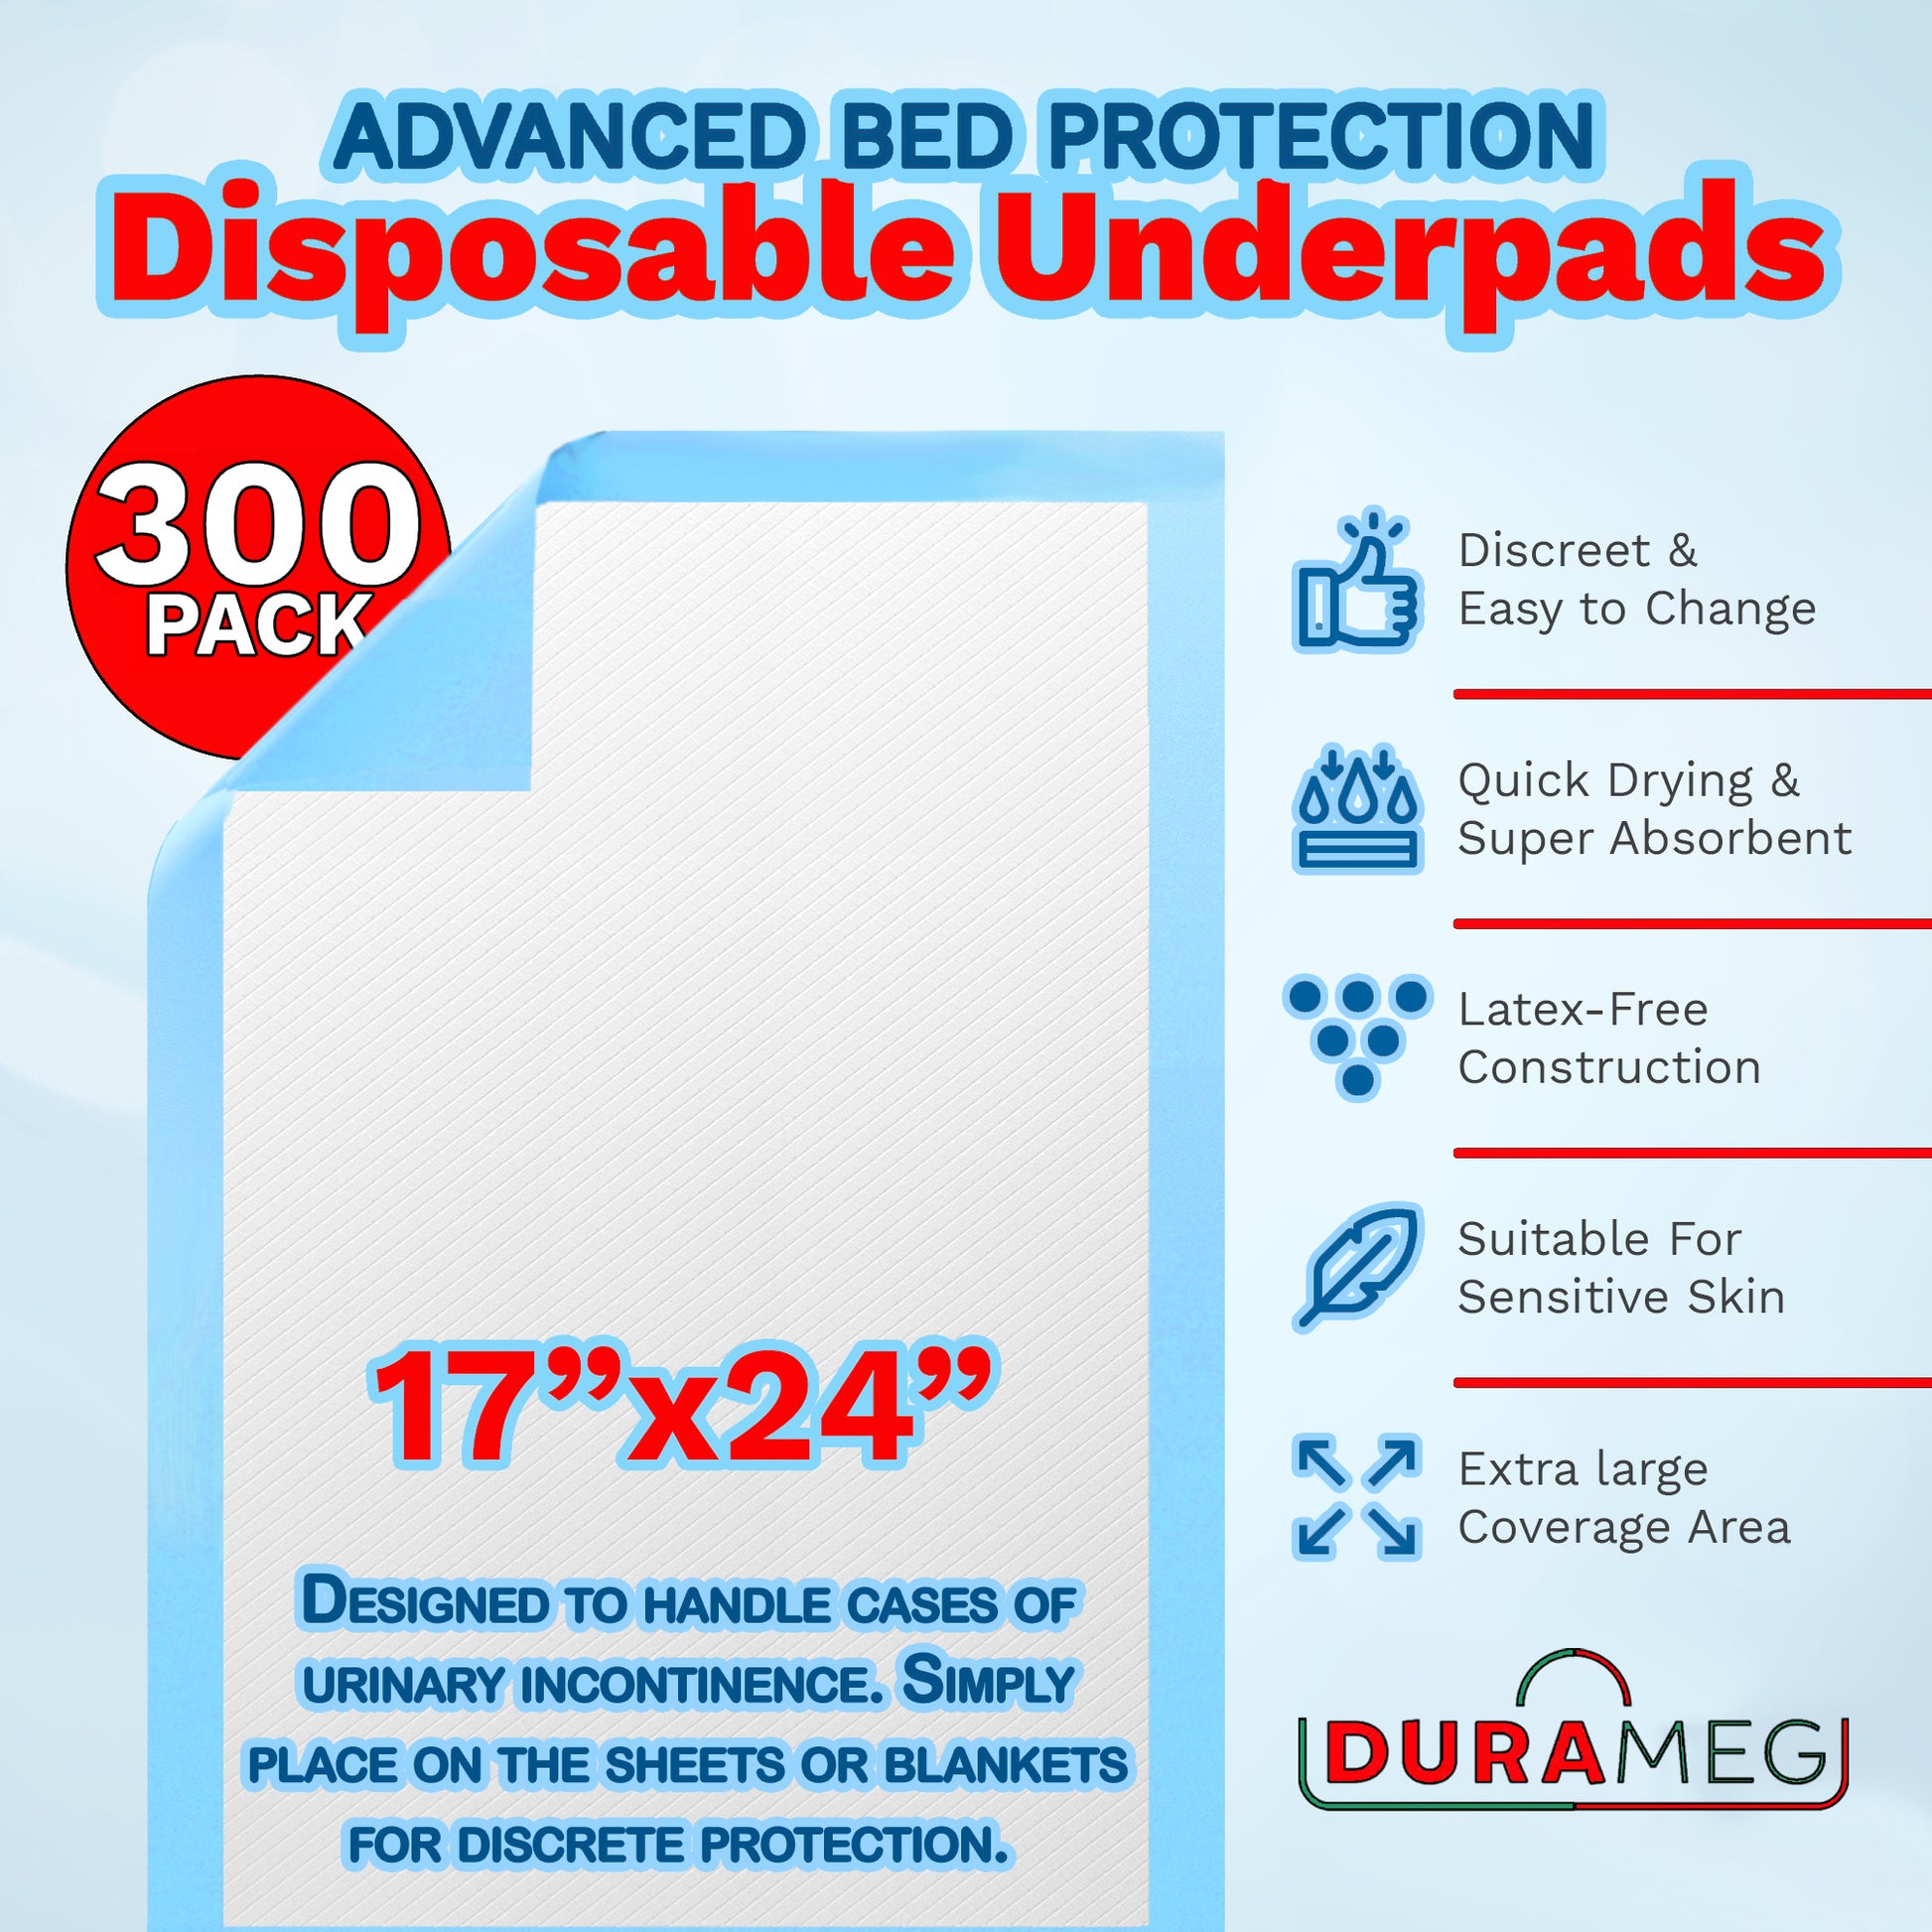 Advanced bed protection pads